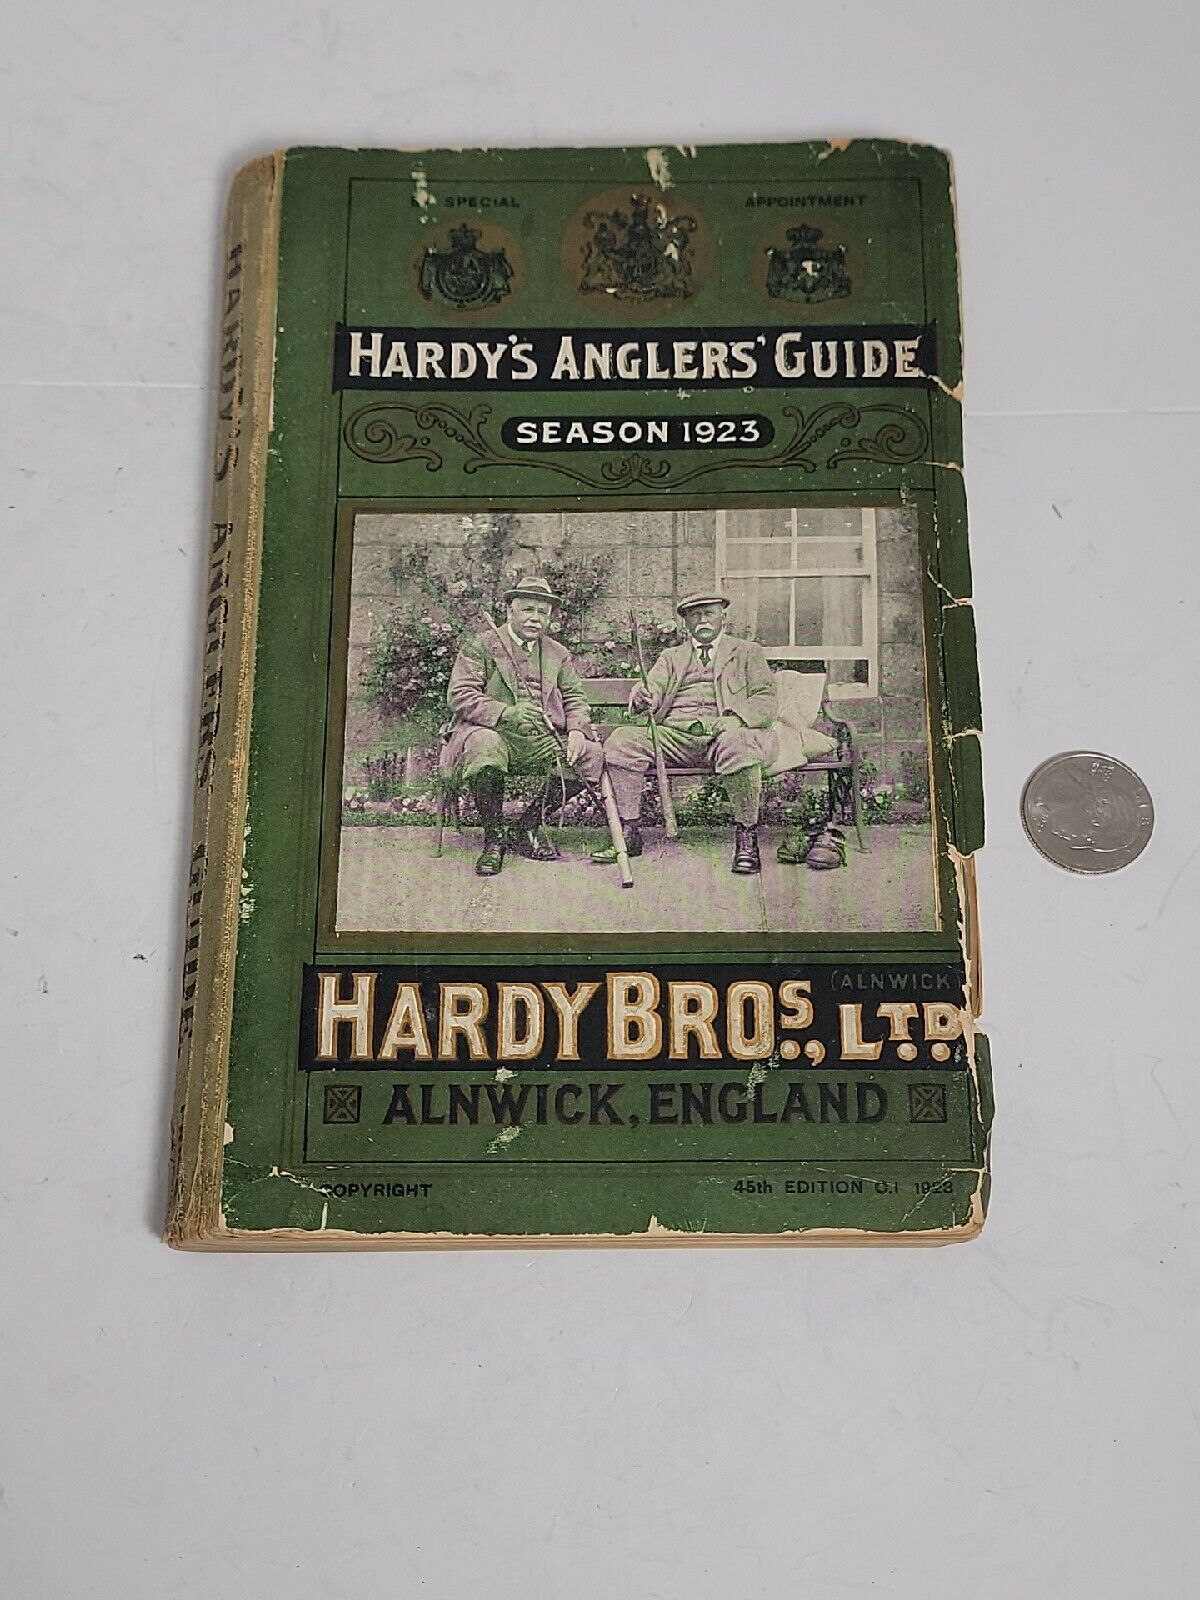 Hardy Bros ltd England anglers guide 45th edition 1923 388 pages GOOD 4 age RARE